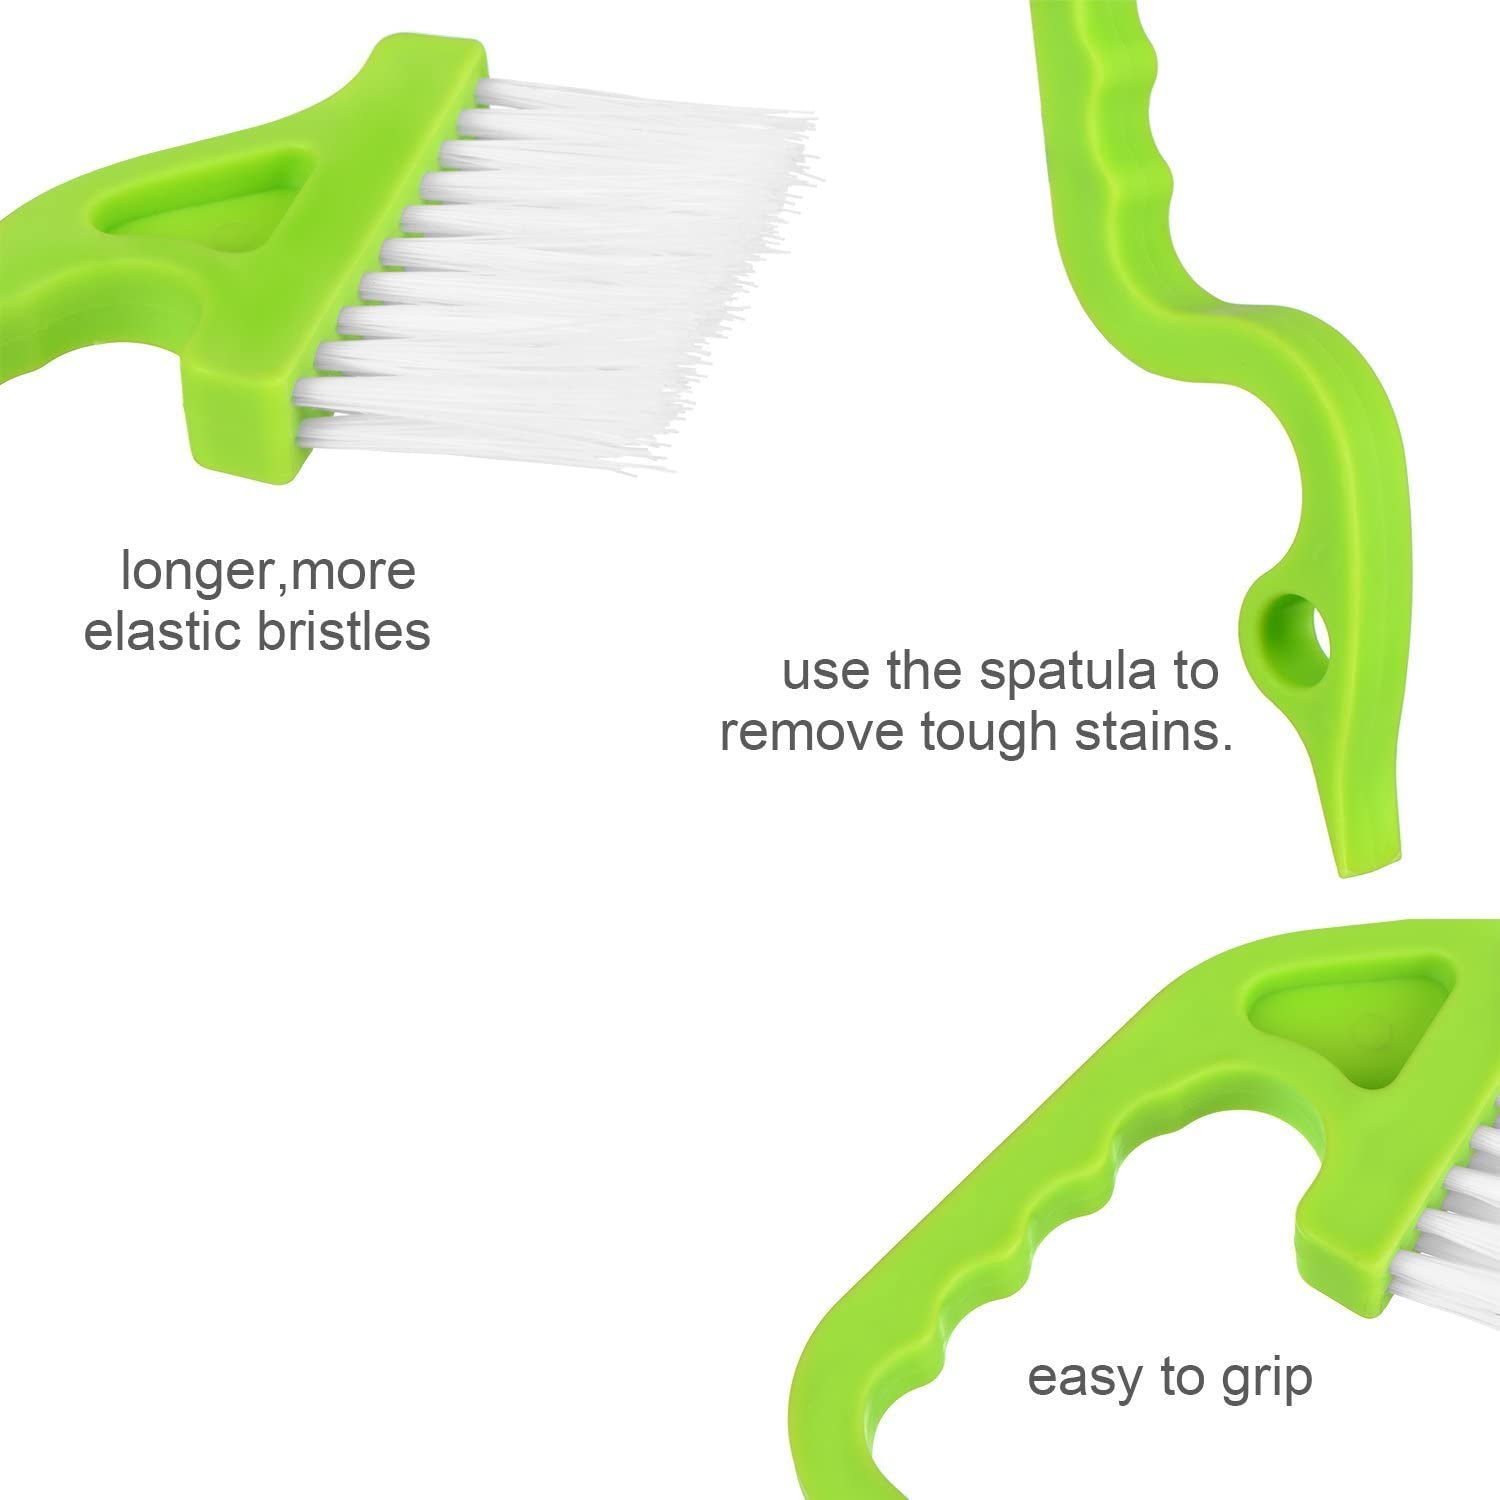 Hand-held Groove Gap Cleaning Tools – Homeydelightshop 125 S Lexington Ave,  Suite 101, Num 63, Asheville, NC 28801 USA